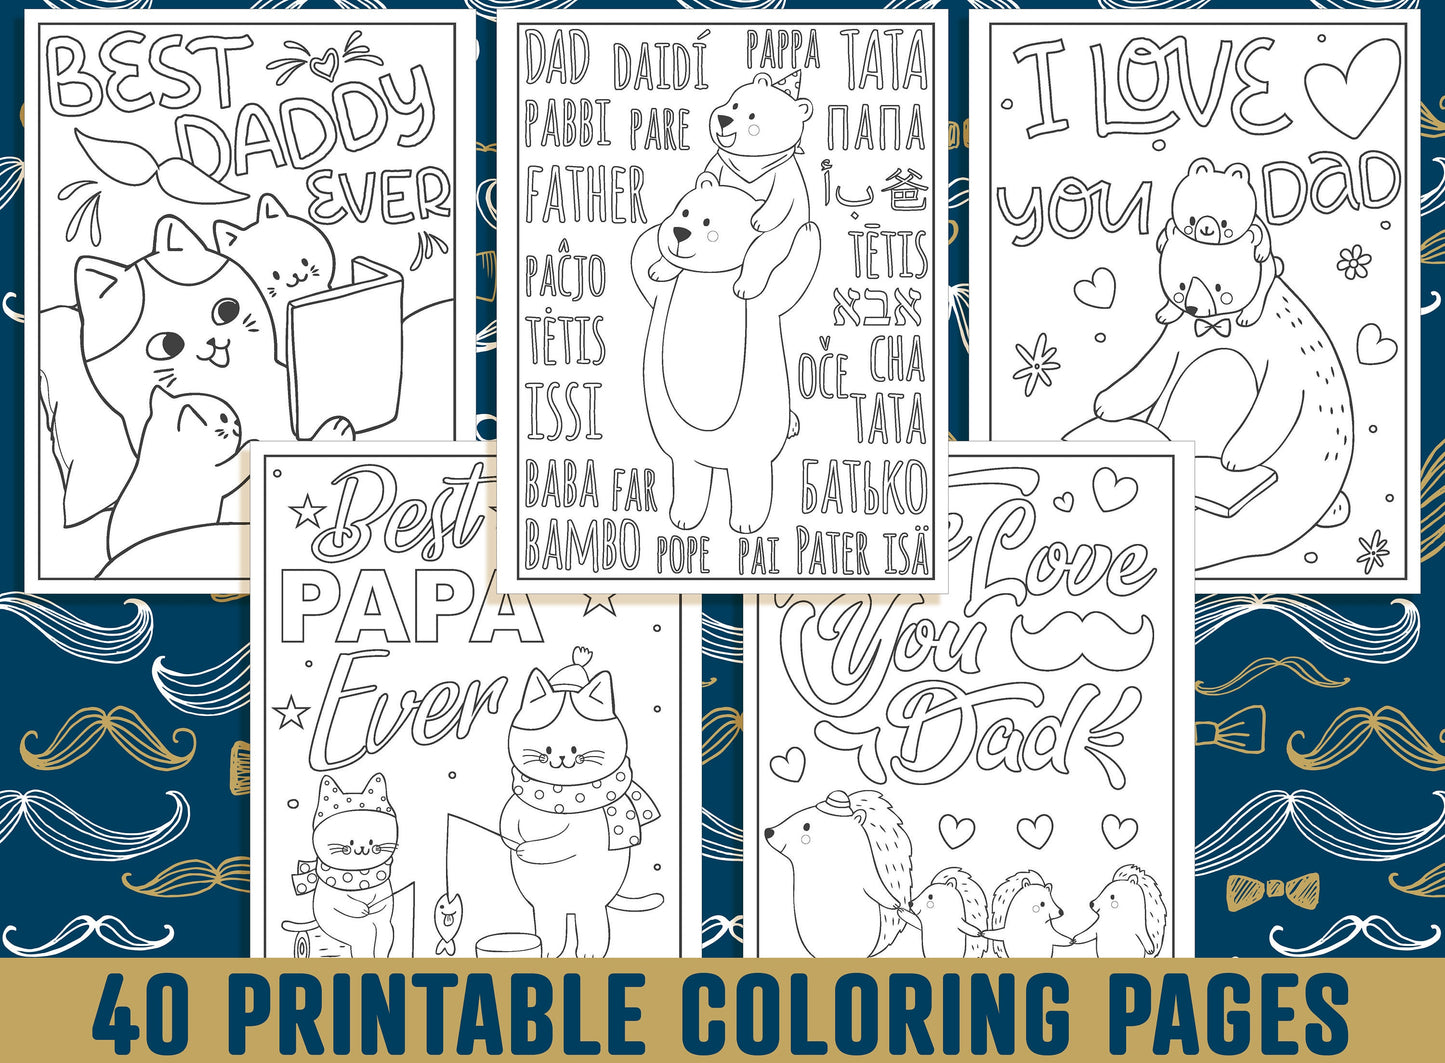 Father's Day Coloring Pages, 40 Happy Father’s Day Coloring Pages for Kids, Boys, Girls, Teens. Gift For Daddy or GrandPa, Dad Coloring Book